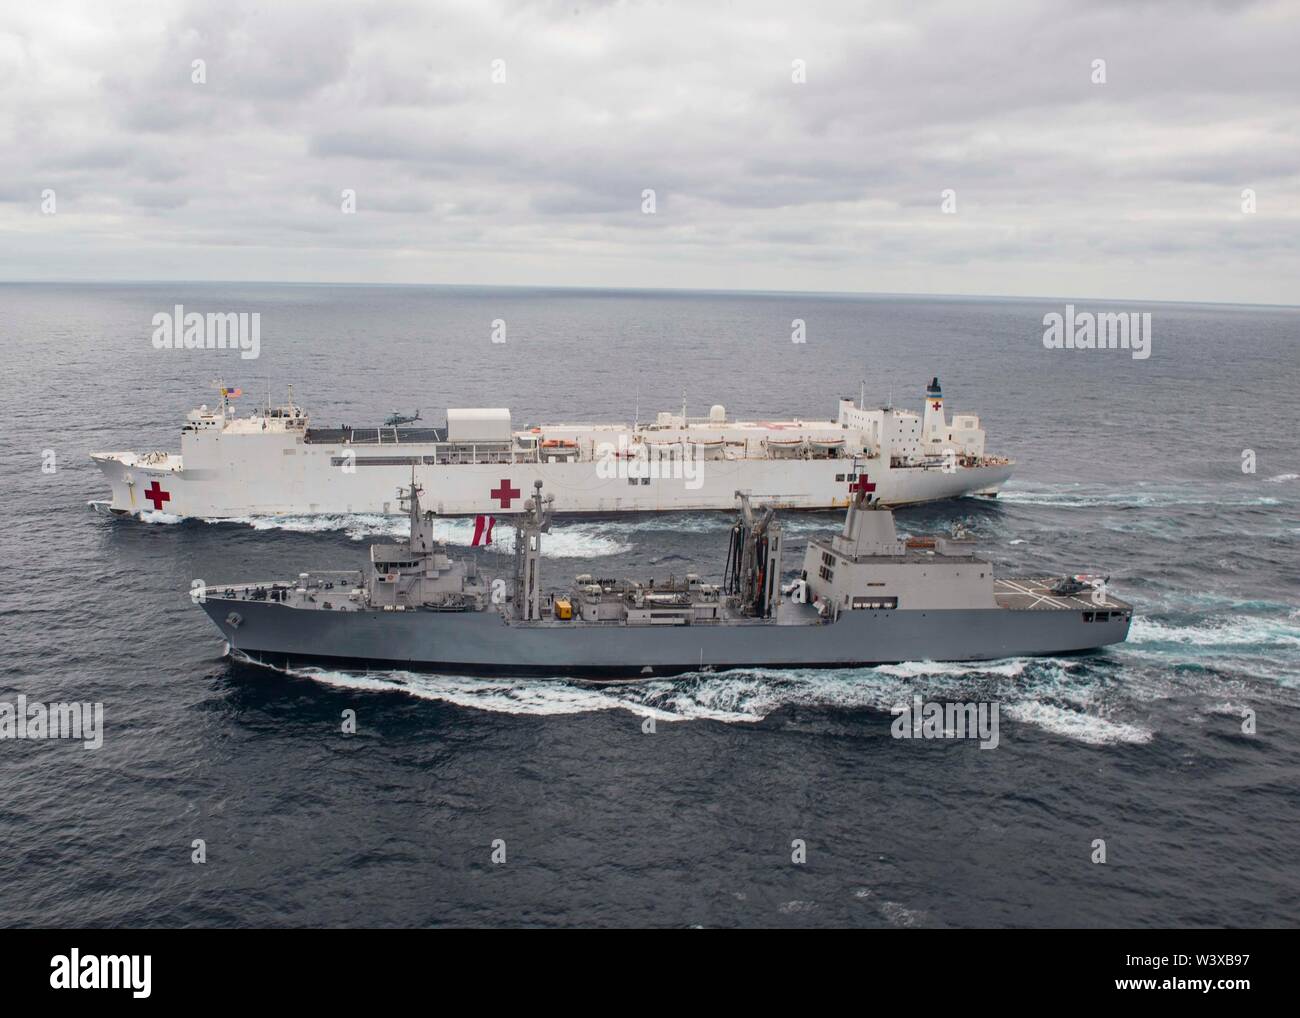 Royal Australian Navy 190716-n-mx527-1085-pacific-ocean-july-16-2019-the-hospital-ship-usns-comfort-t-ah-20-practices-a-replenishment-at-sea-with-the-peruvian-ship-bap-tacna-arl-158-comfort-is-working-with-health-and-government-partners-in-central-america-south-america-and-the-caribbean-to-provide-care-on-the-ship-and-at-land-based-medical-sites-helping-to-relieve-pressure-on-national-medical-systems-strained-by-an-increase-in-venezuelan-migrants-us-navy-photo-by-mass-communication-specialist-3rd-class-brendan-fitzgerald-W3XB97